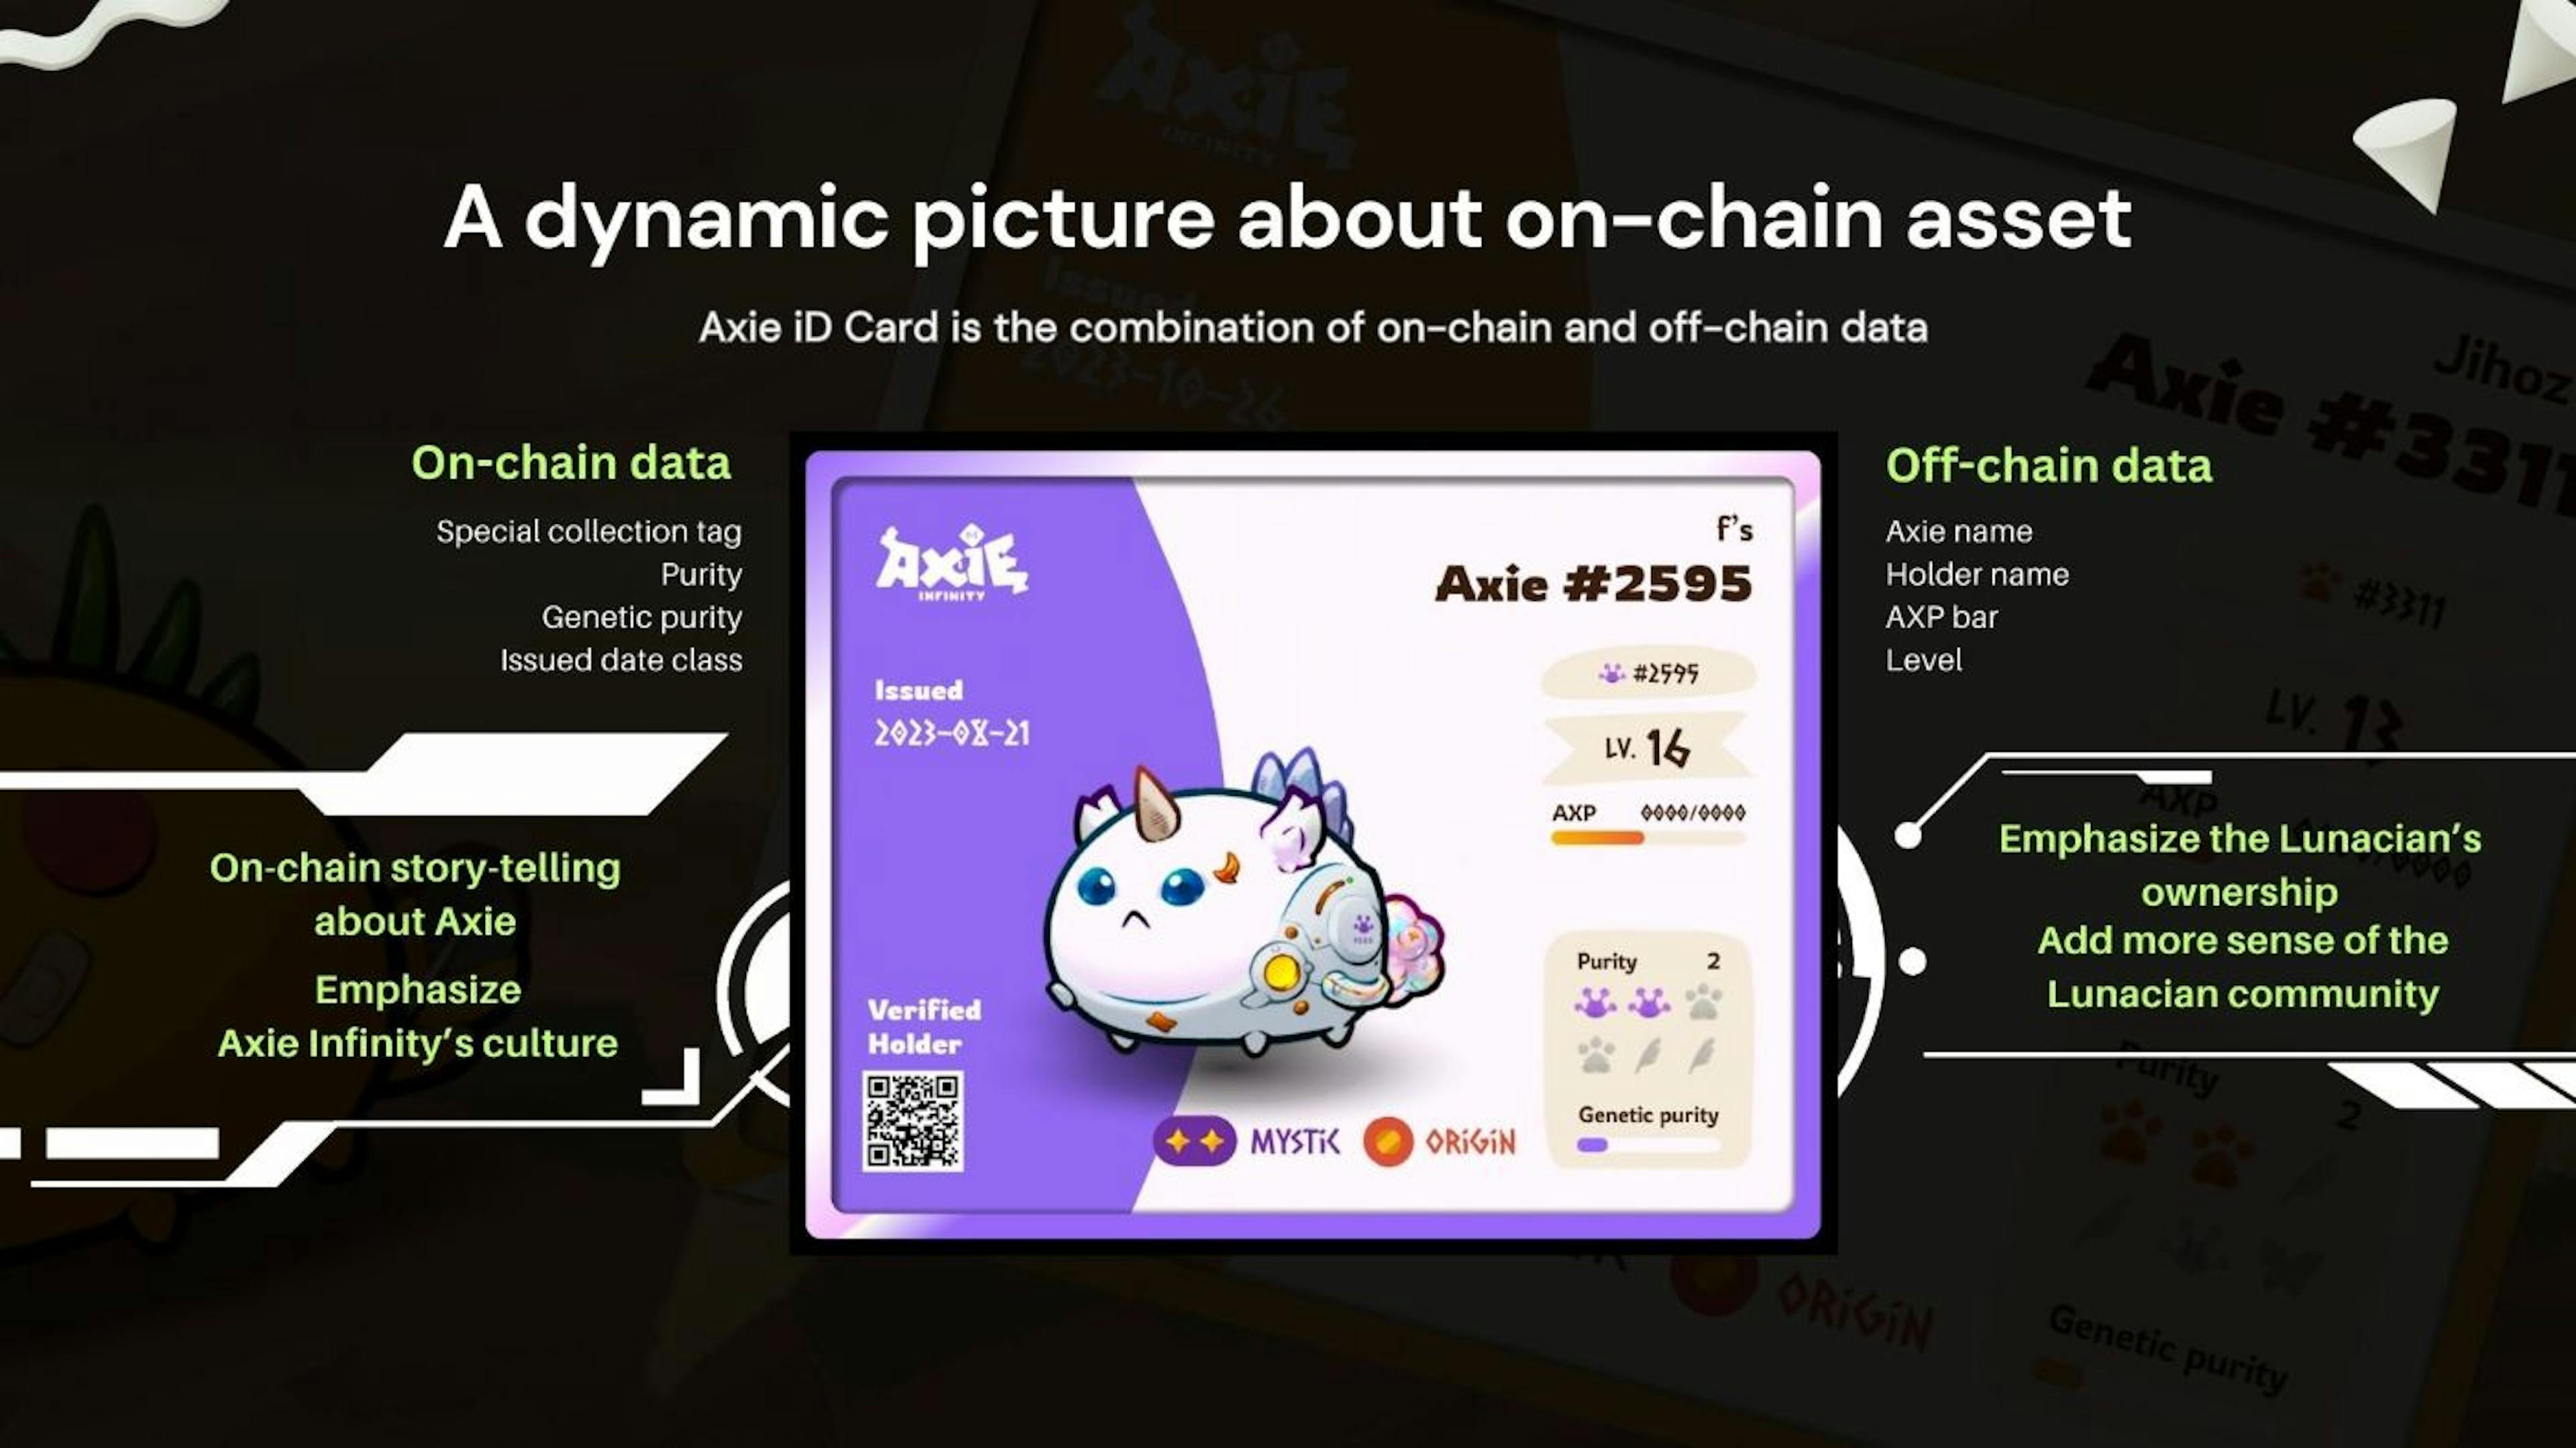  The Axie iD Card Campaign generated roughly 20,000 OCC called Axie iD Card Mementos (NFT).